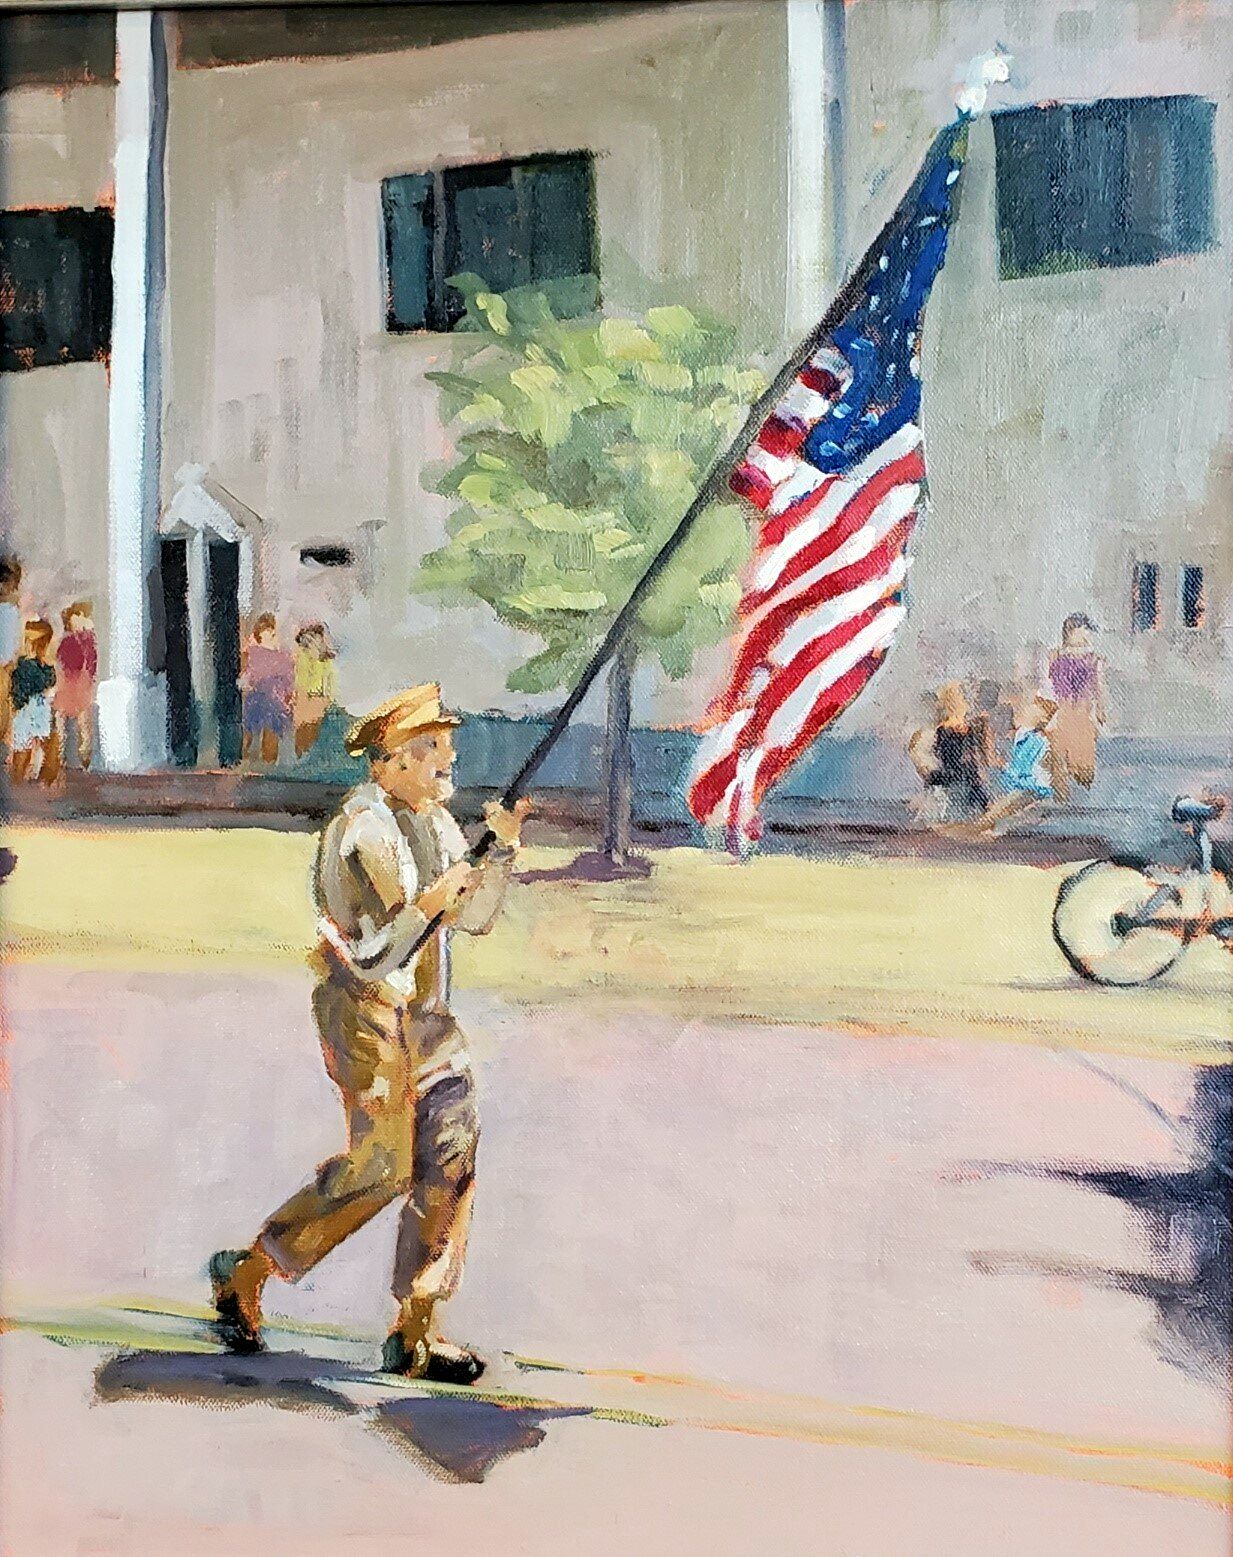 Tom Smith, "Marching On," studio, photo reference. "I painted a photo I took from the tiny Fourth of July parade at Kenyon College in Gambier, Ohio. I was in awe of the old soldier, soldiering on."